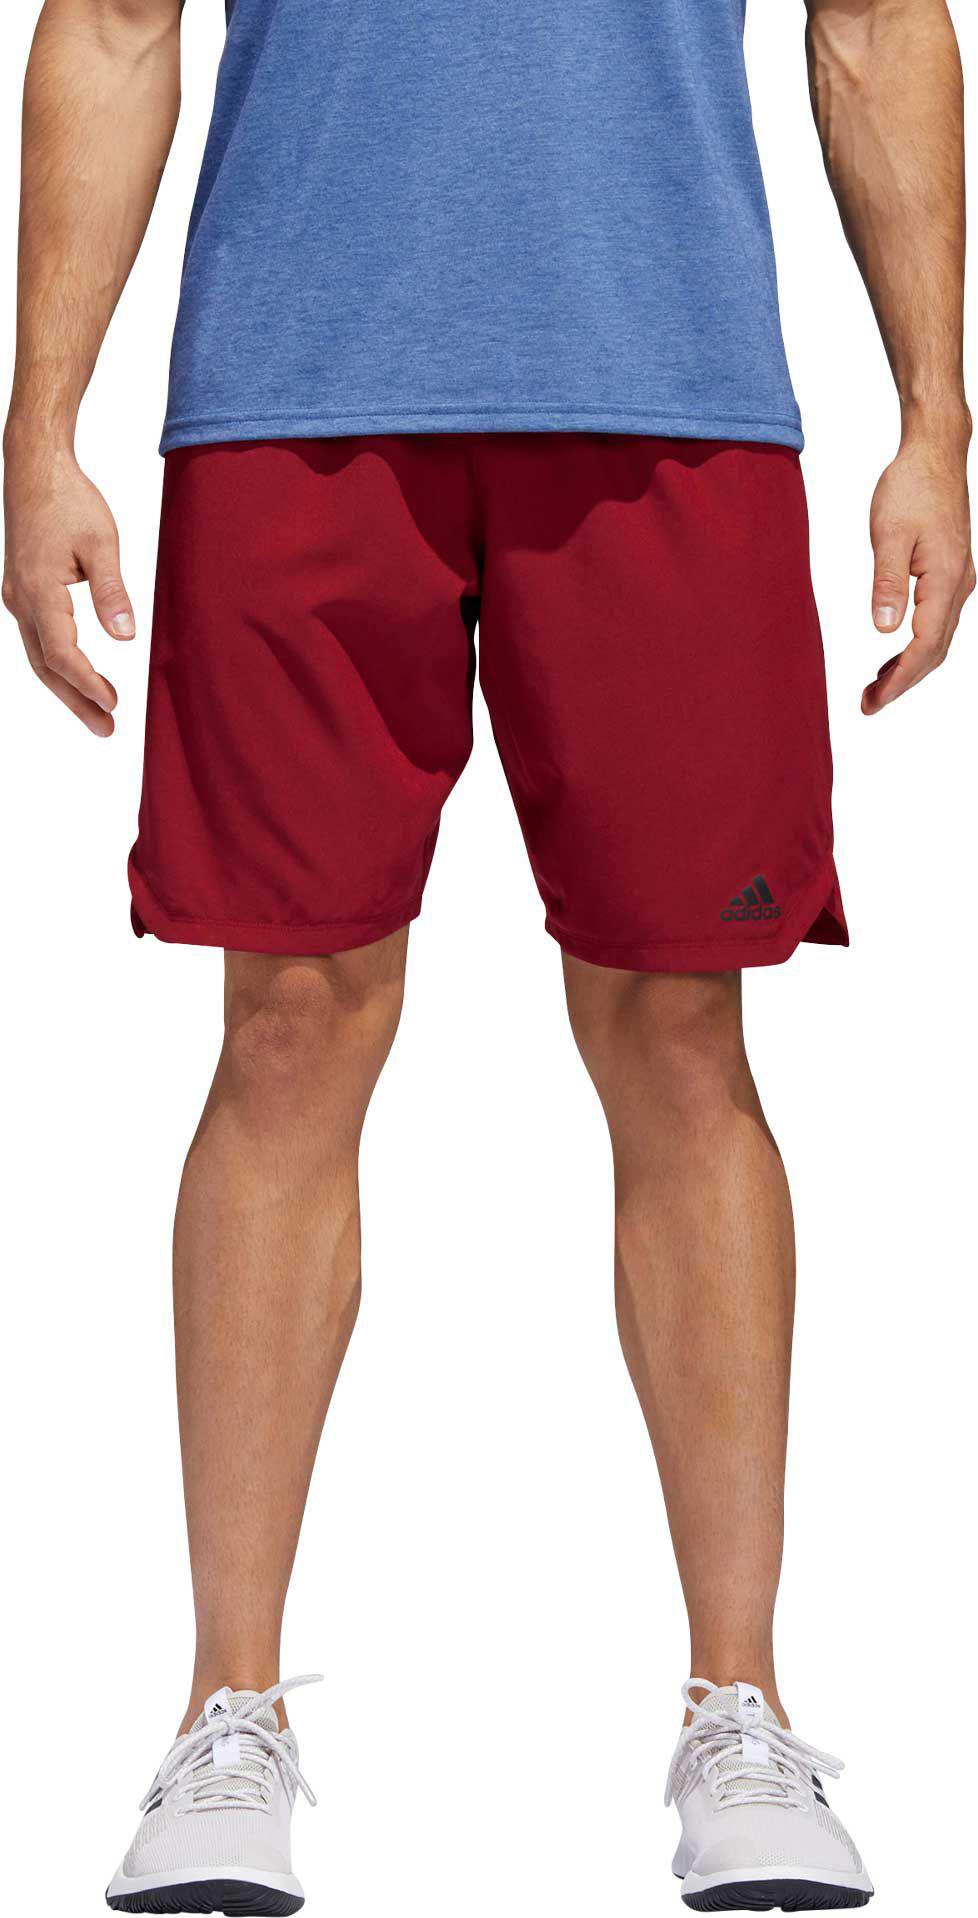 Men, what are your favorite shorts to workout in? : r/crossfit